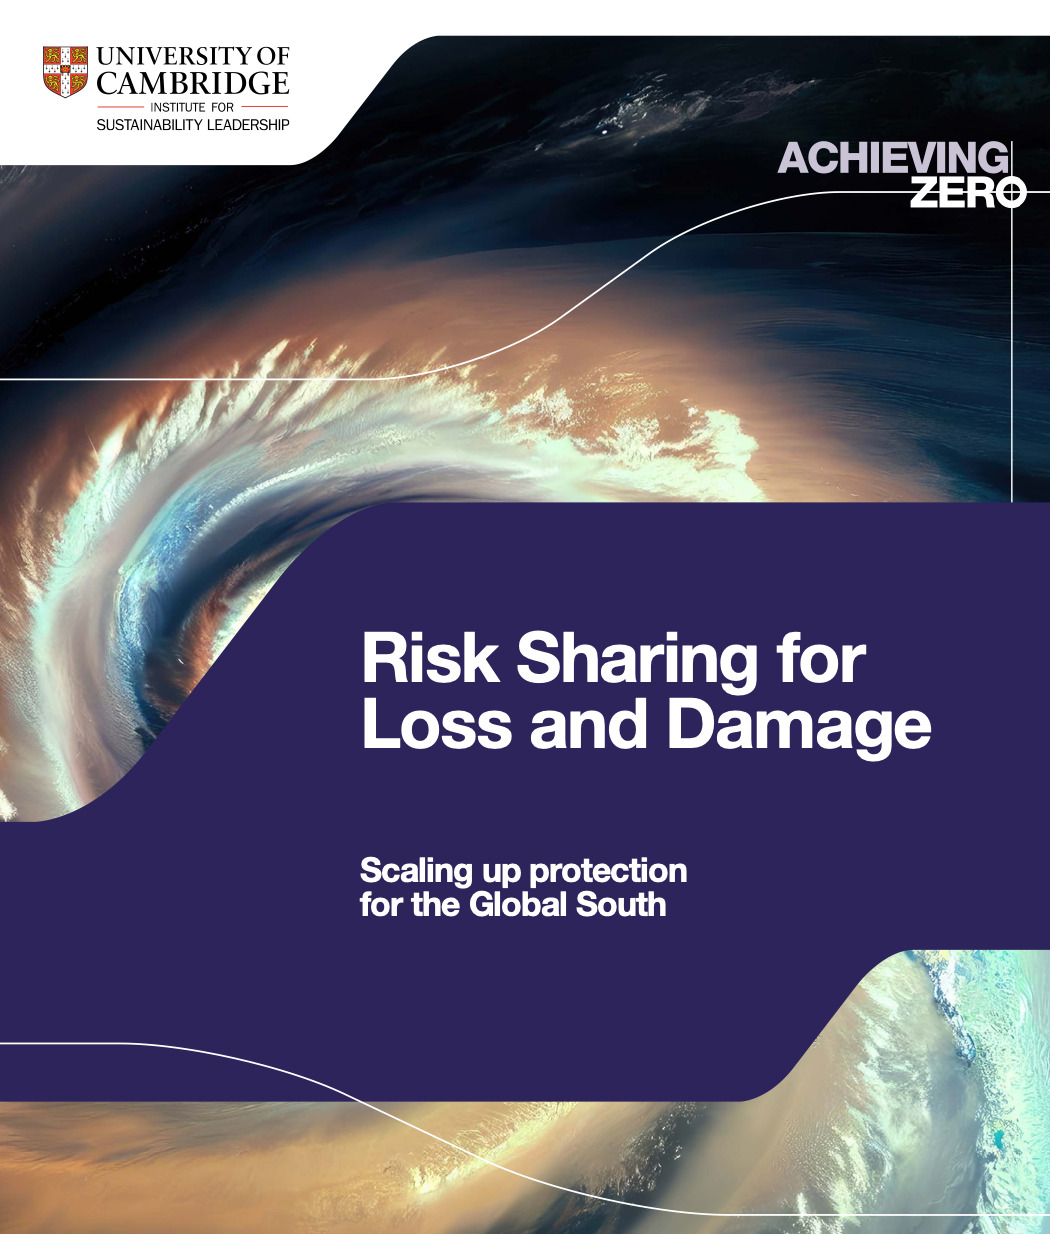 Risk sharing for Loss and Damage: Scaling up protection for the Global South